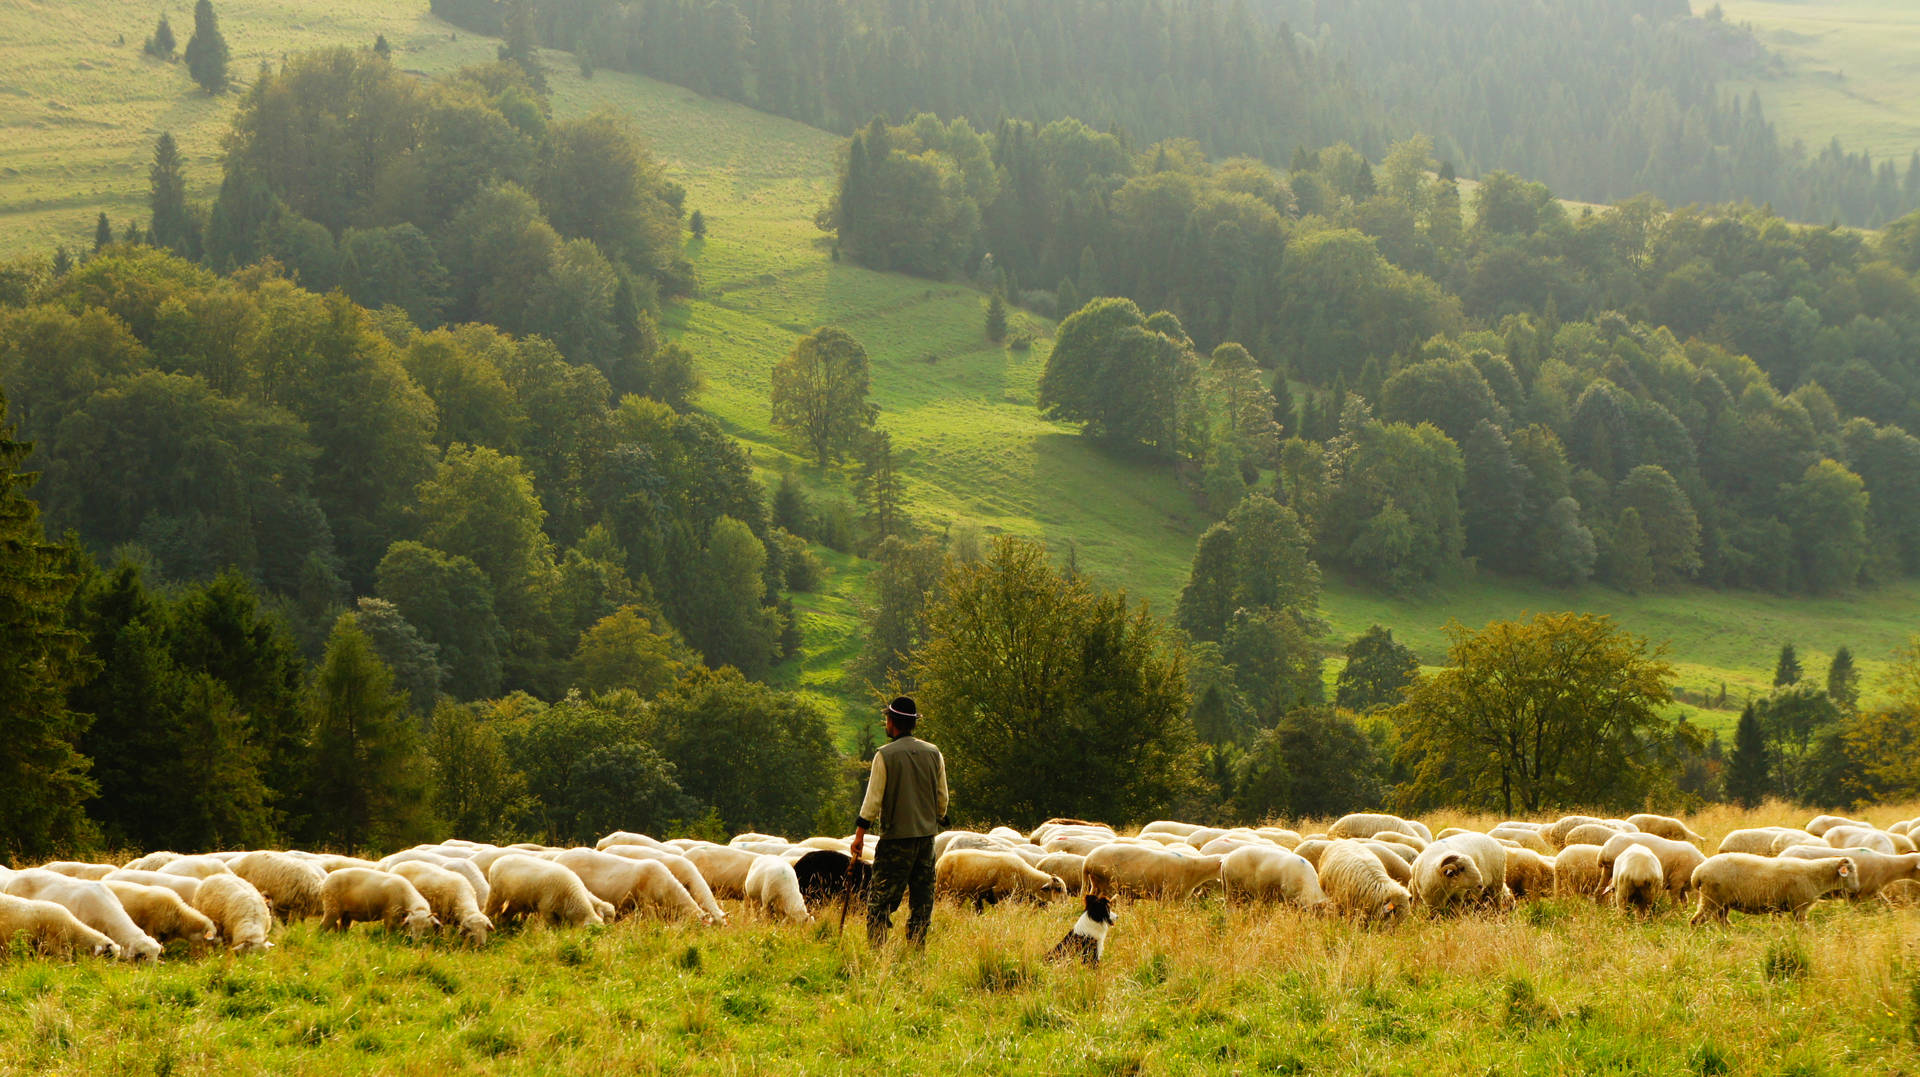 Man With Group Of Sheep Wallpaper